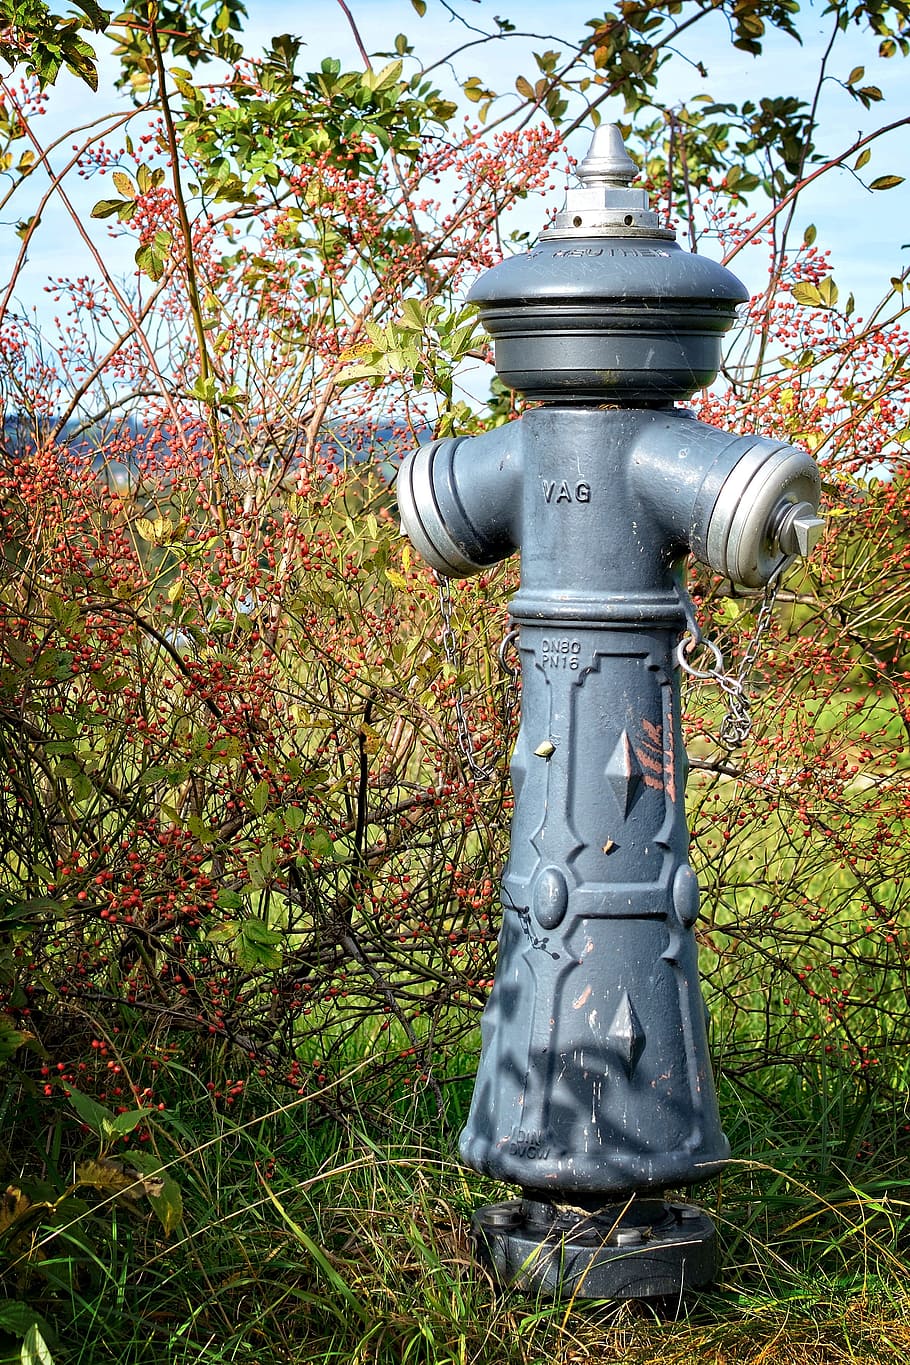 Hydrant, Water, Distribution, water, distribution, water hydrant, fire fighting water, water utilities, water abstraction, connection, distributor